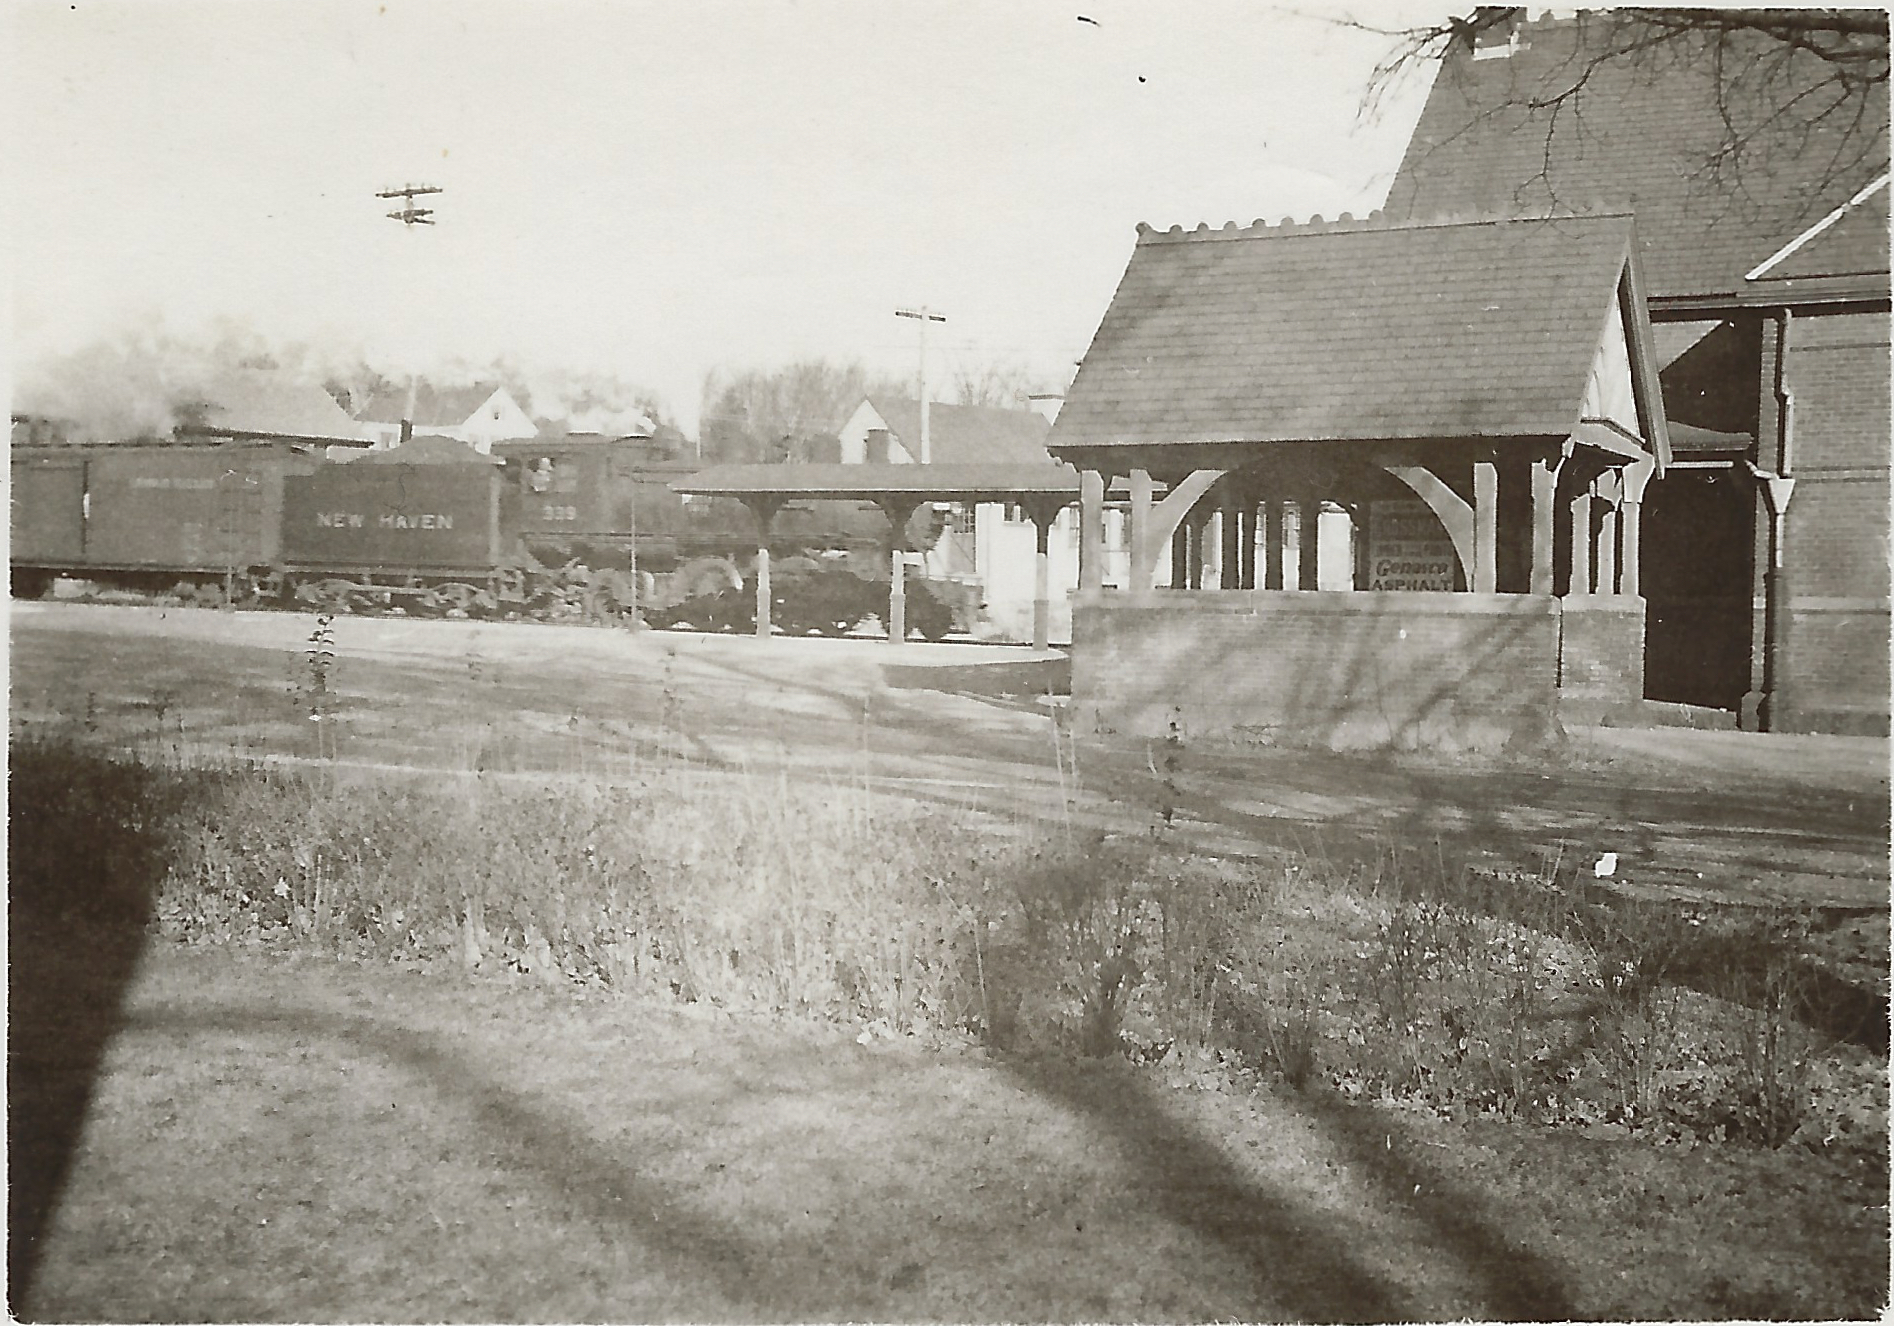 Southborough Station and Train, 1930s